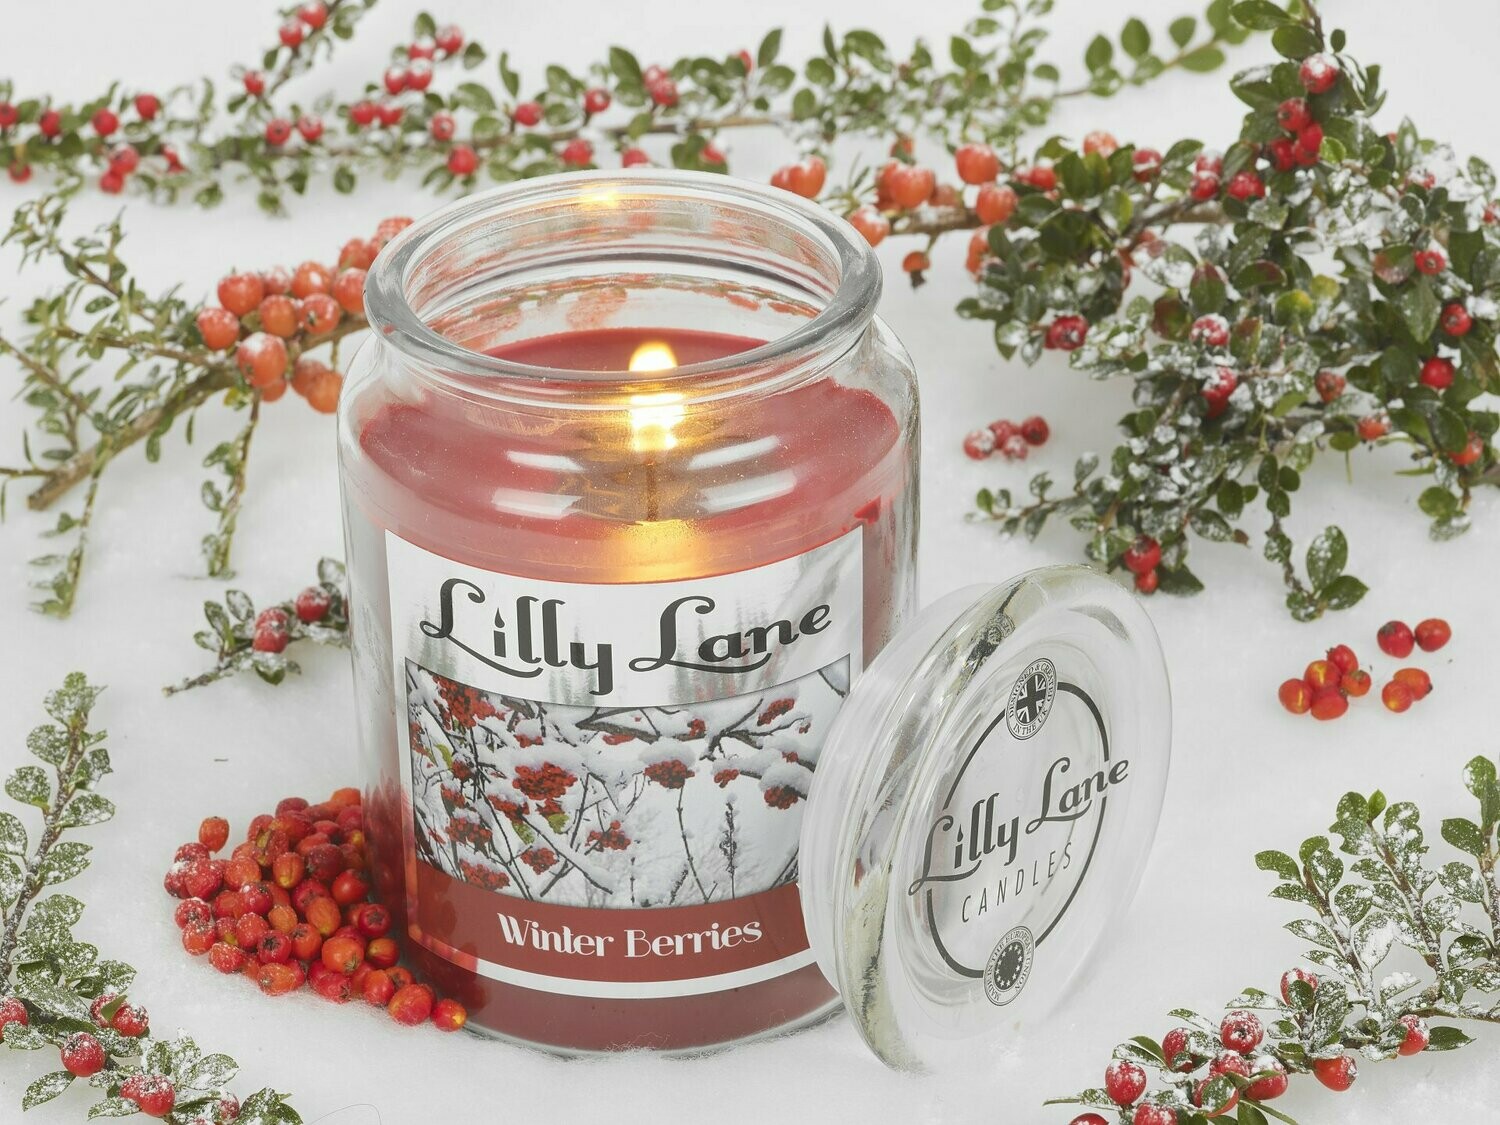 Lilly Lane 18oz Large Scented Candles In Glass Jar Fragrance Aromatic Home Gift 